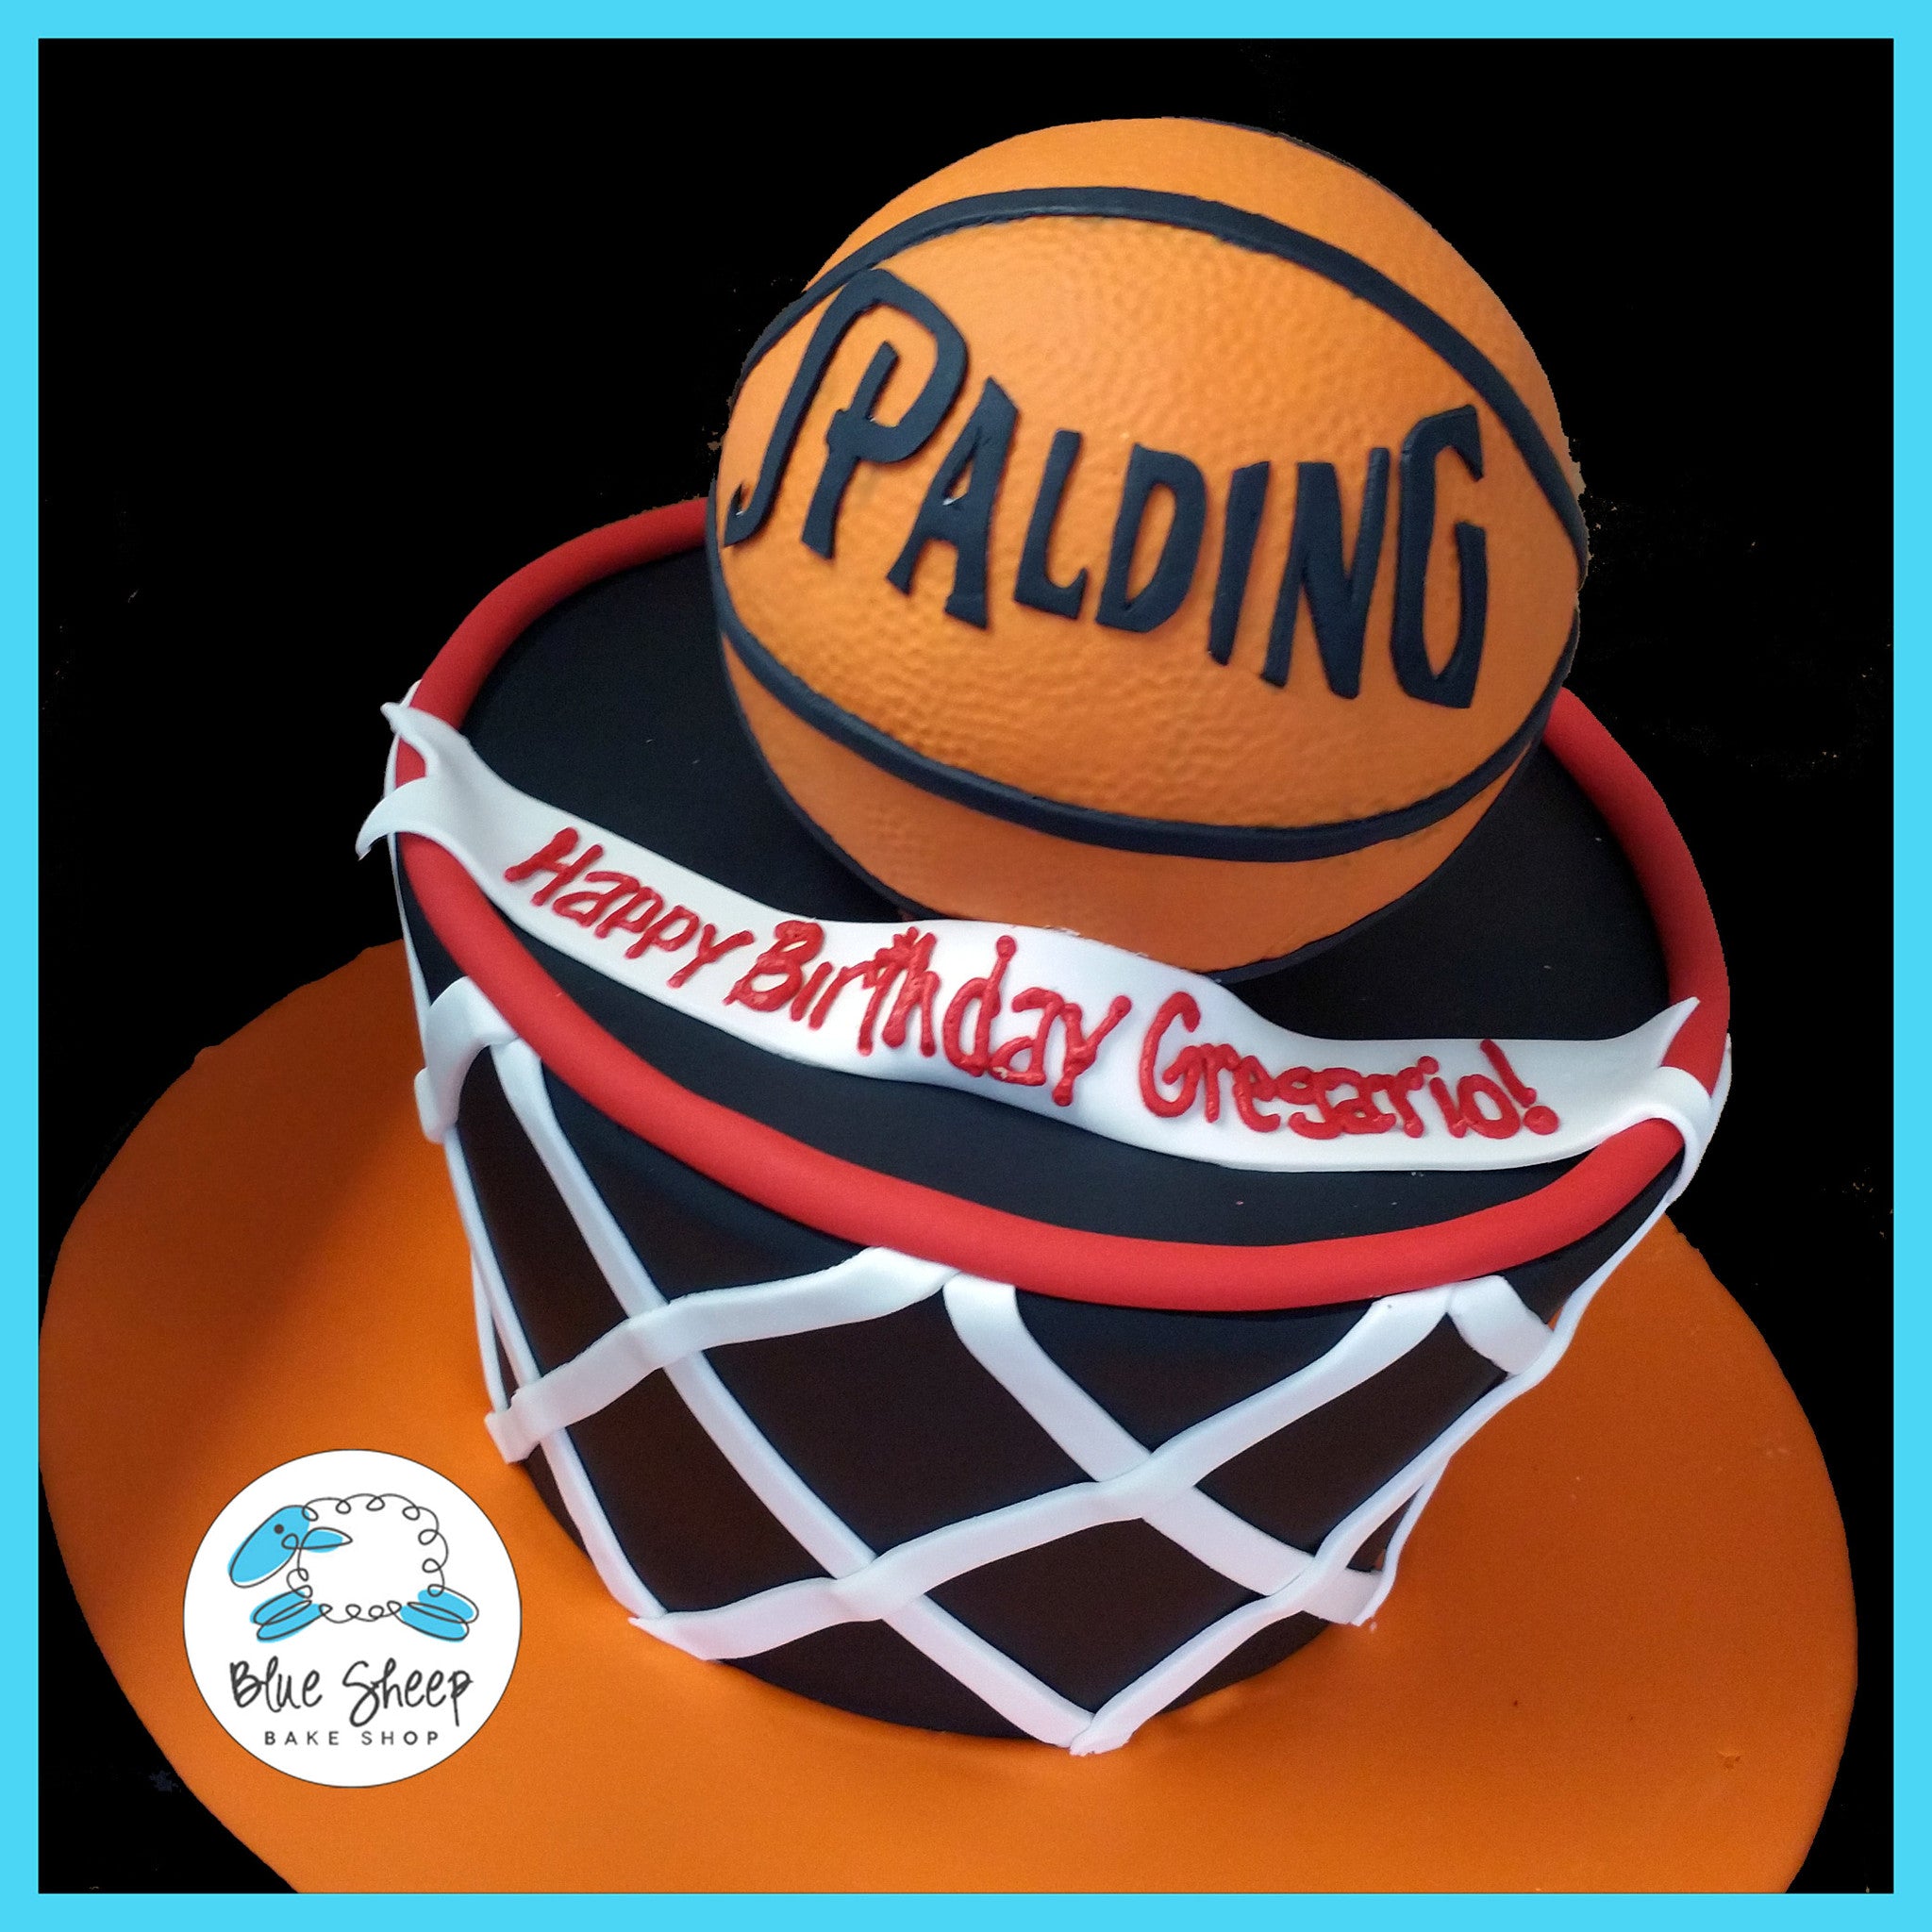 Buy 20 PCS Basketball Cake Toppers, Basketball Star Themed Cake Decorations  for Basketball Birthday Cake Party Decorations Basketball Party Supplies  Online at Low Prices in India - Amazon.in